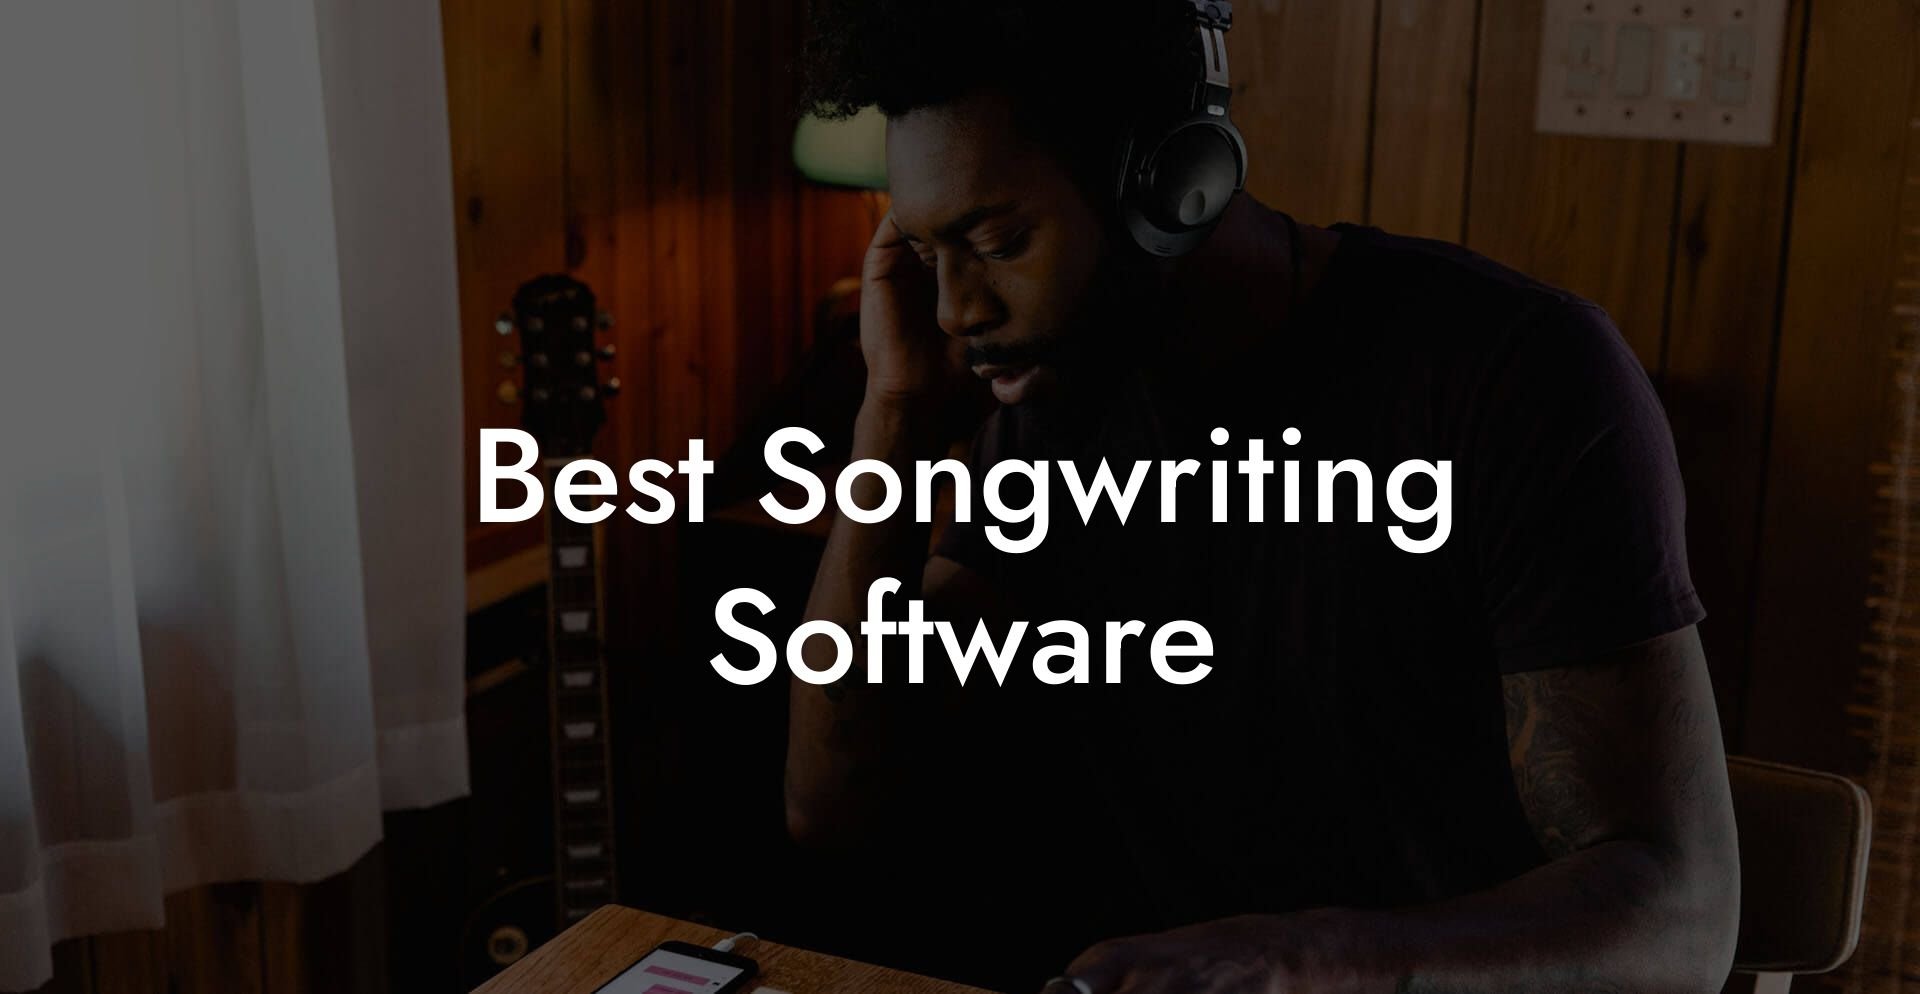 best songwriting software lyric assistant